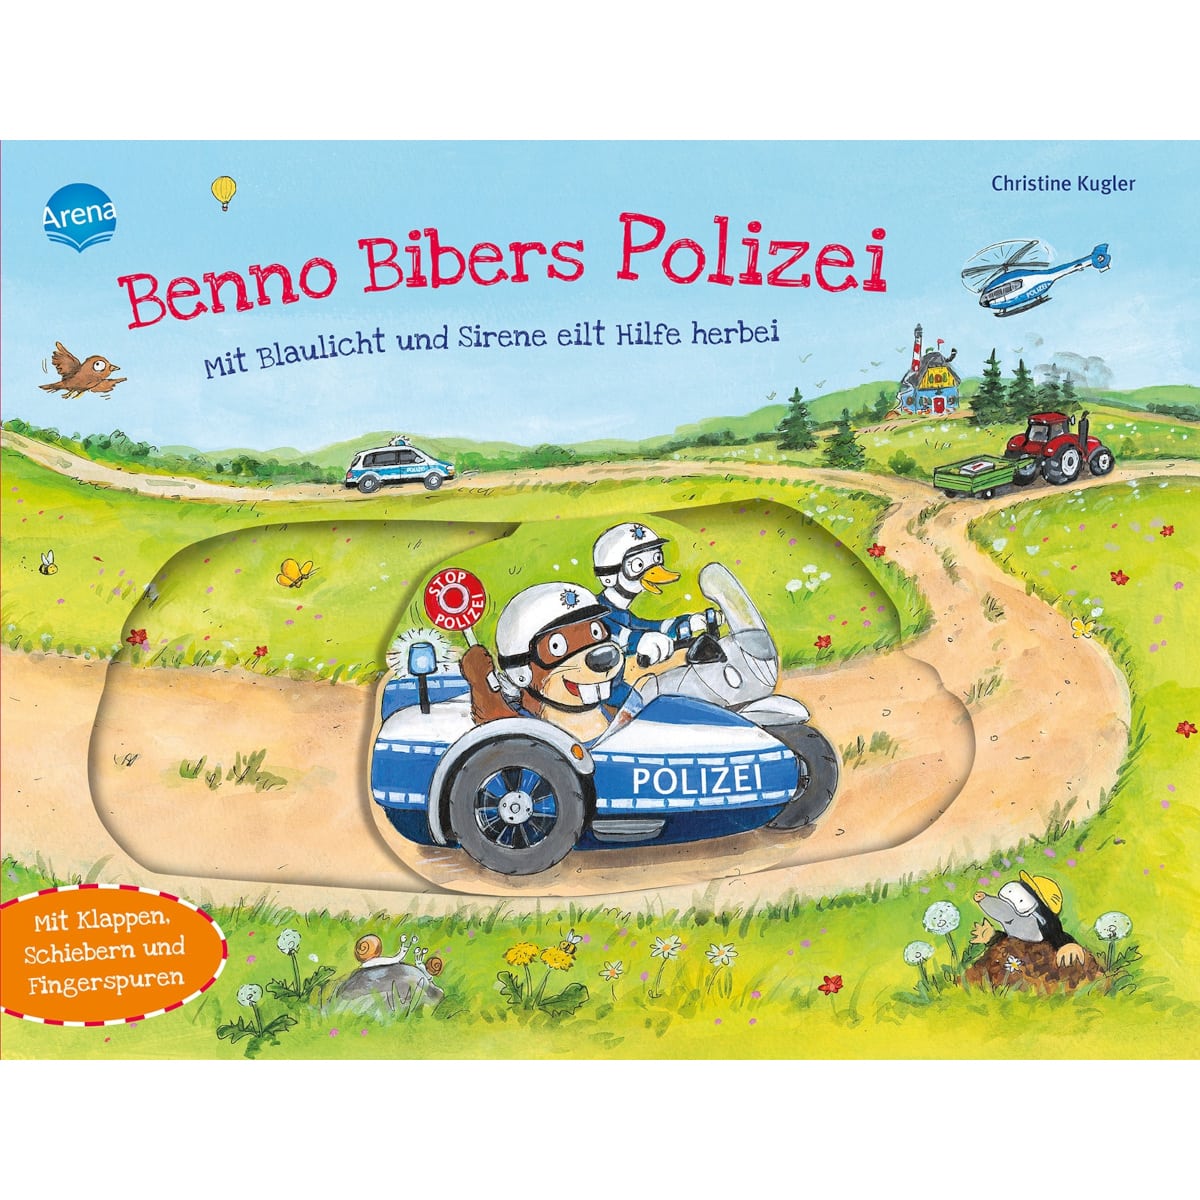 https://www.rofu.de/out/pictures/master/product/1/241555_9783401717555_arena_benno_bibers_polizei_01.jpg